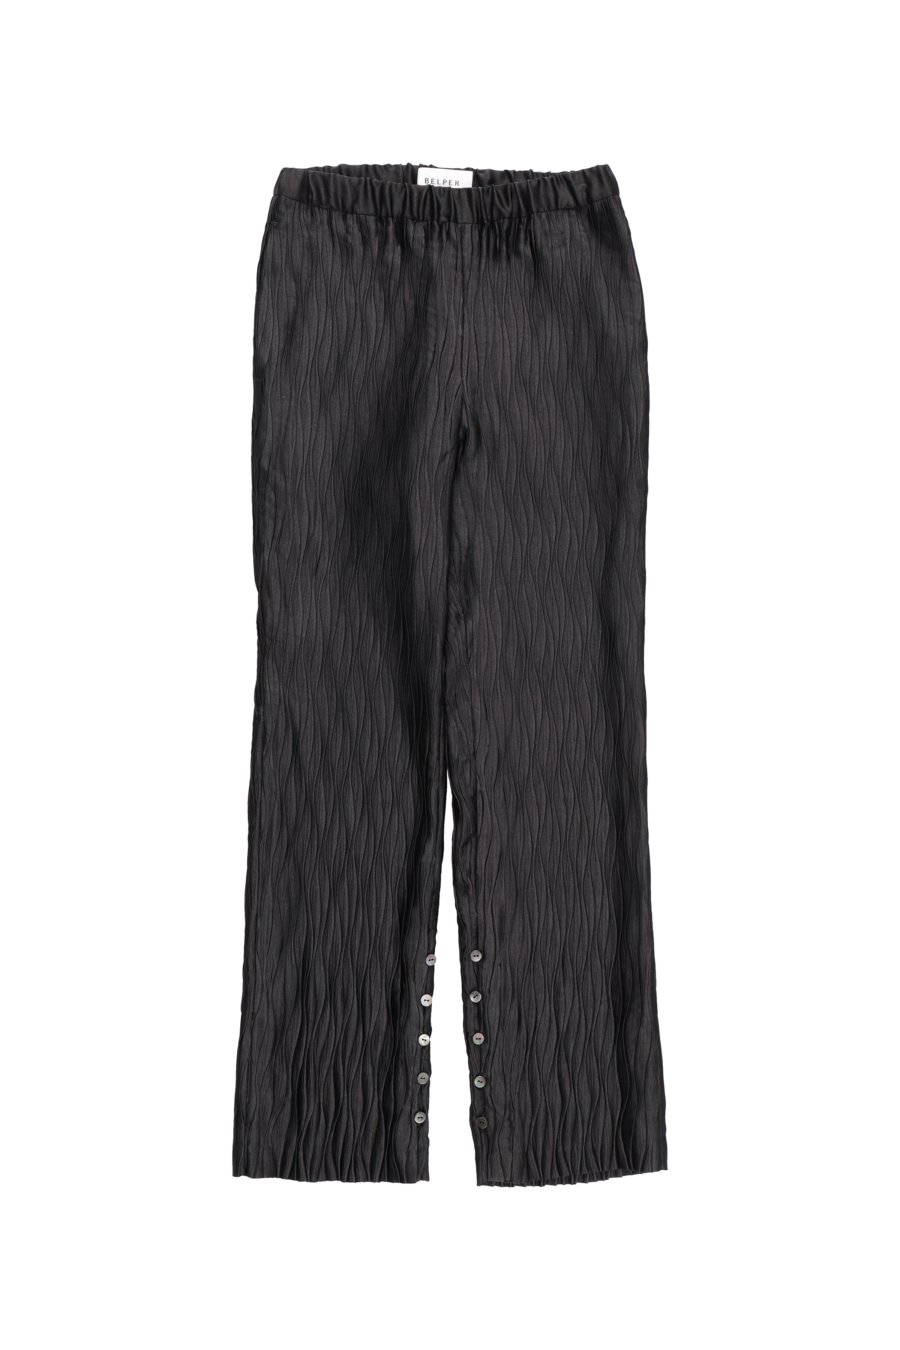 BELPER  PLEATED PANTS(BLACK)<img class='new_mark_img2' src='https://img.shop-pro.jp/img/new/icons15.gif' style='border:none;display:inline;margin:0px;padding:0px;width:auto;' />